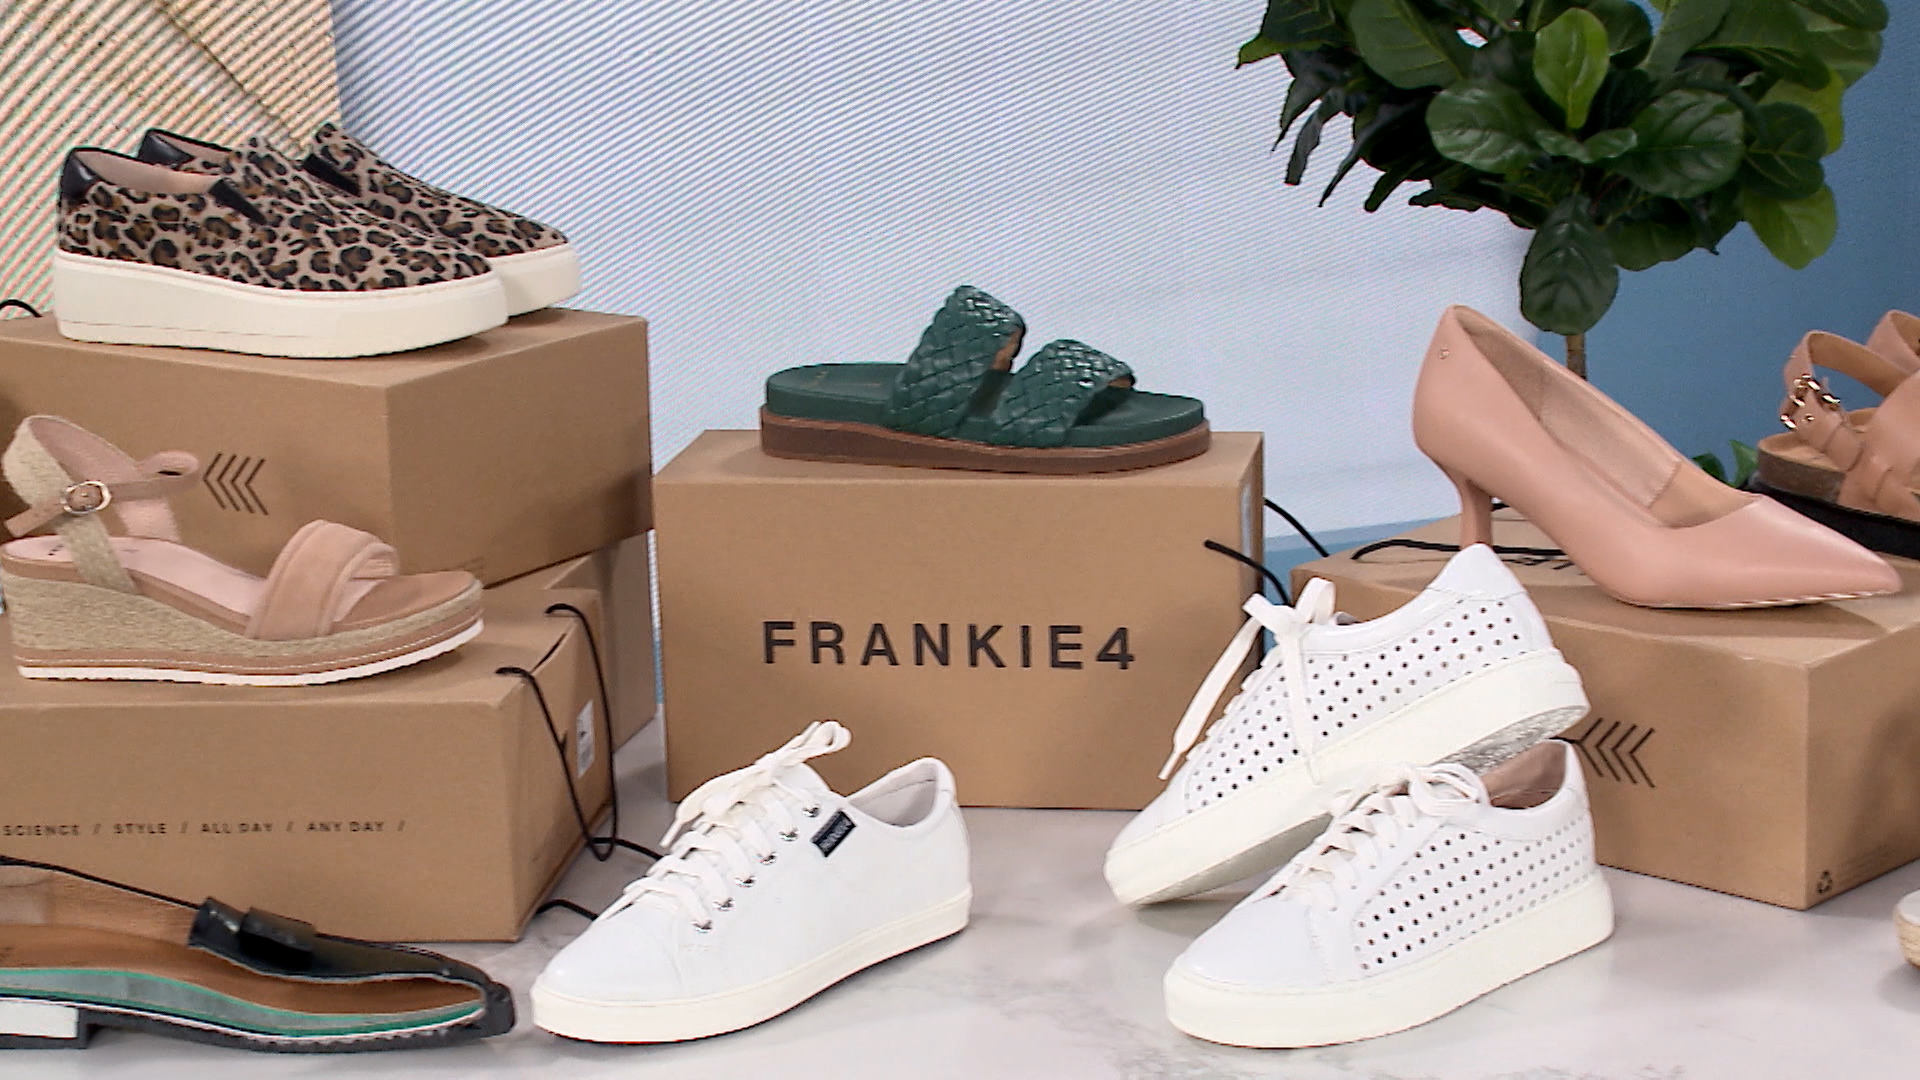 Fashion and Functionality: Stylish Shoes That Are Comfortable [Video]